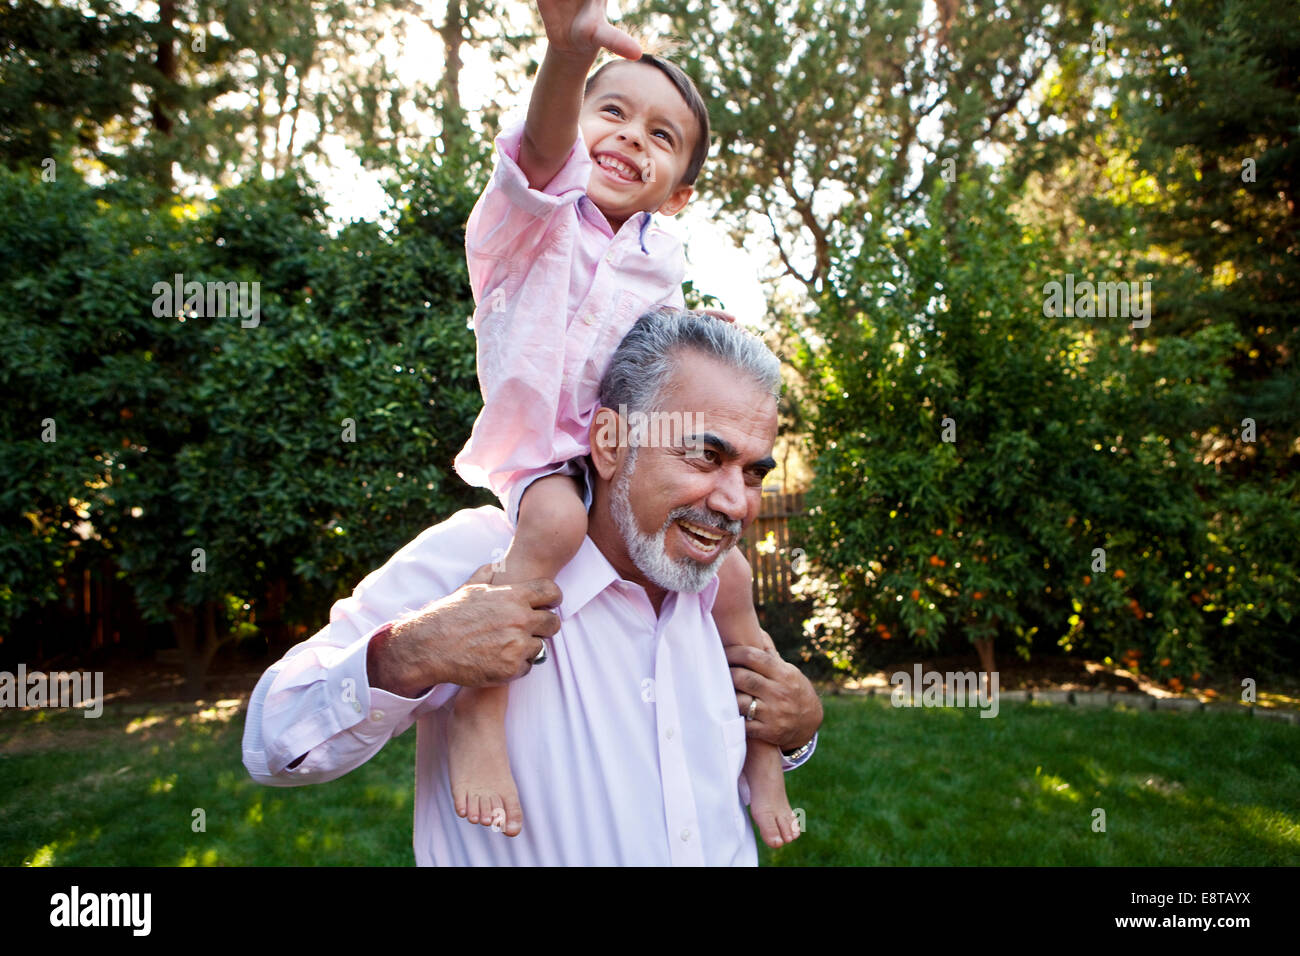 Grandfather carrying grandson on shoulders in backyard Stock Photo